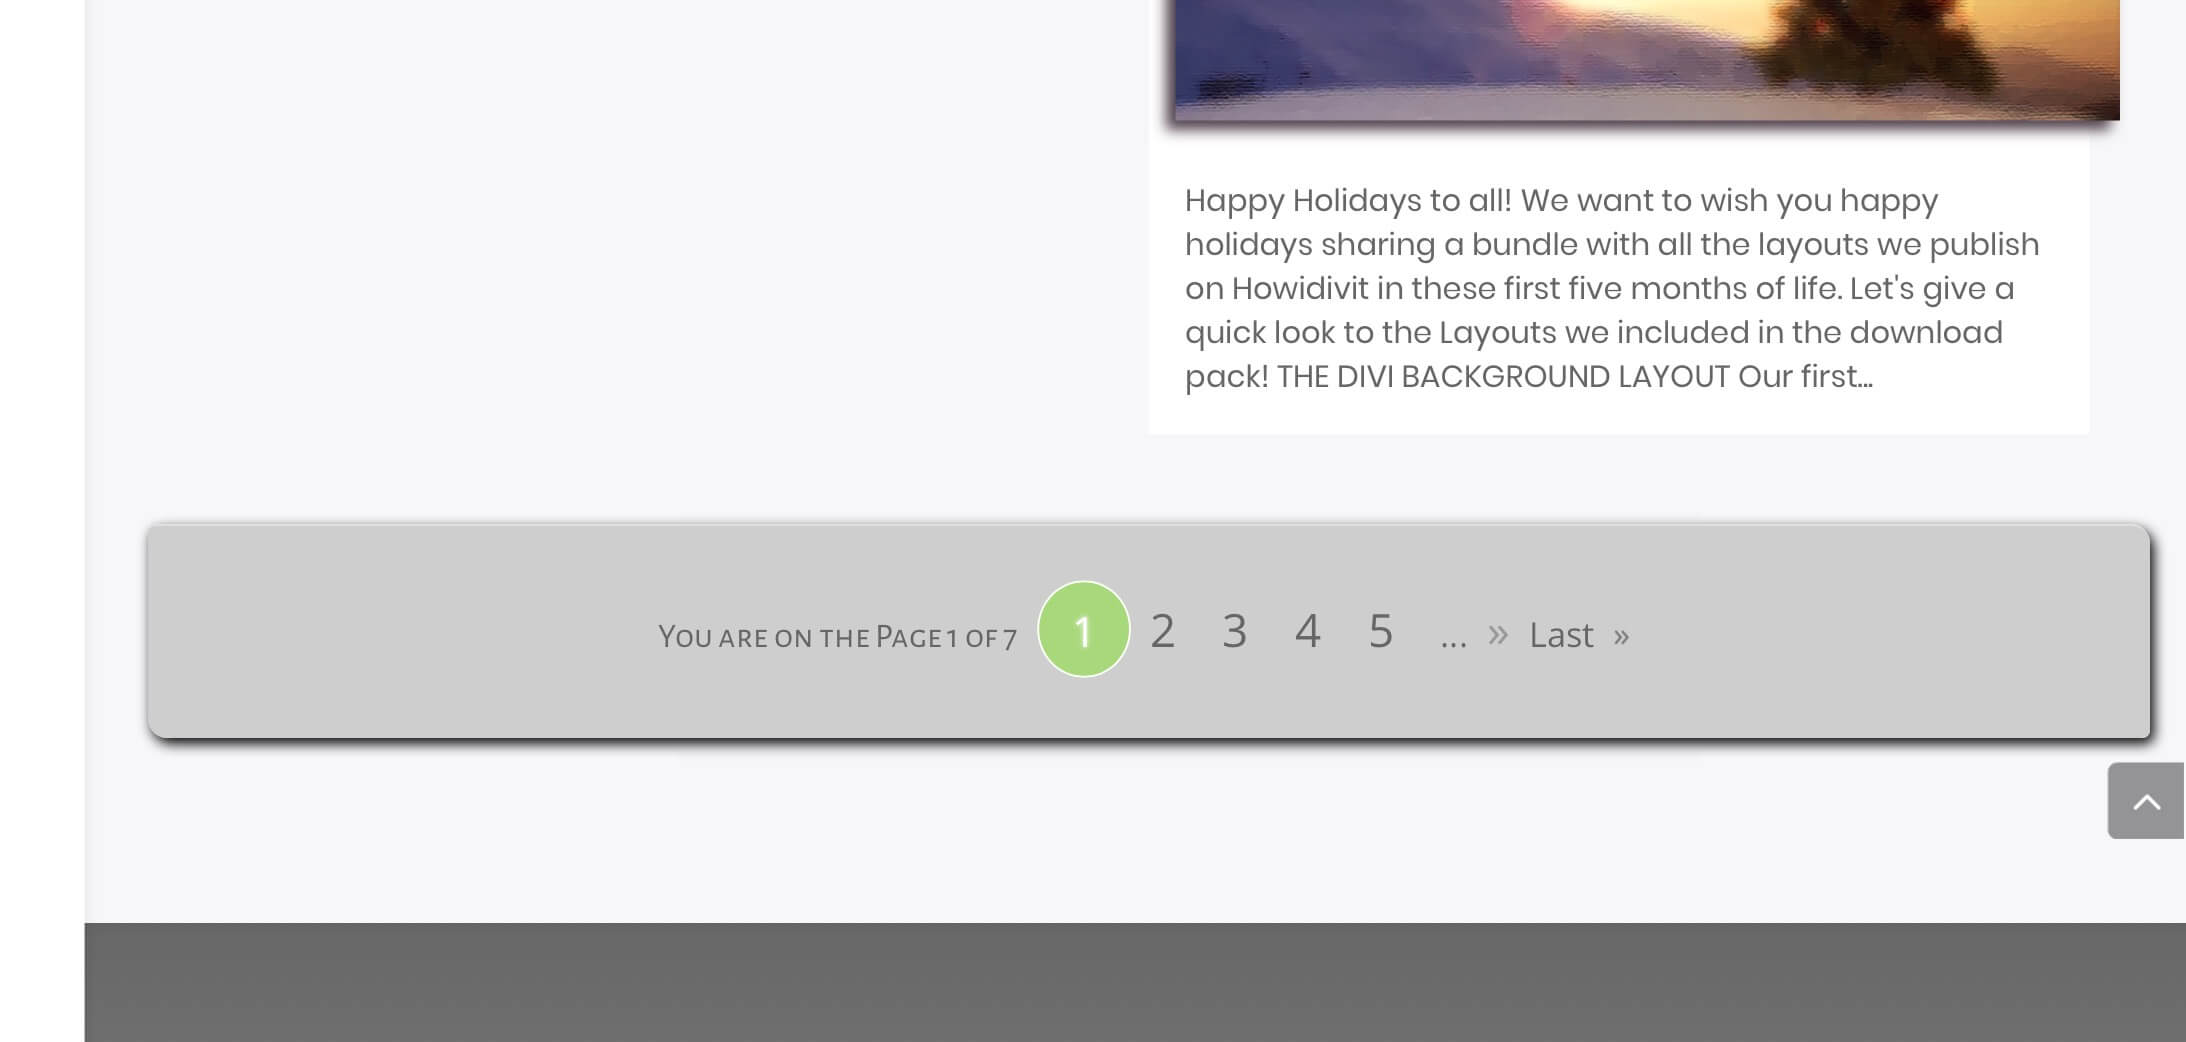 Divi Blog Section V – Blog Pagination with WP-PageNavi and a little jQuery trick